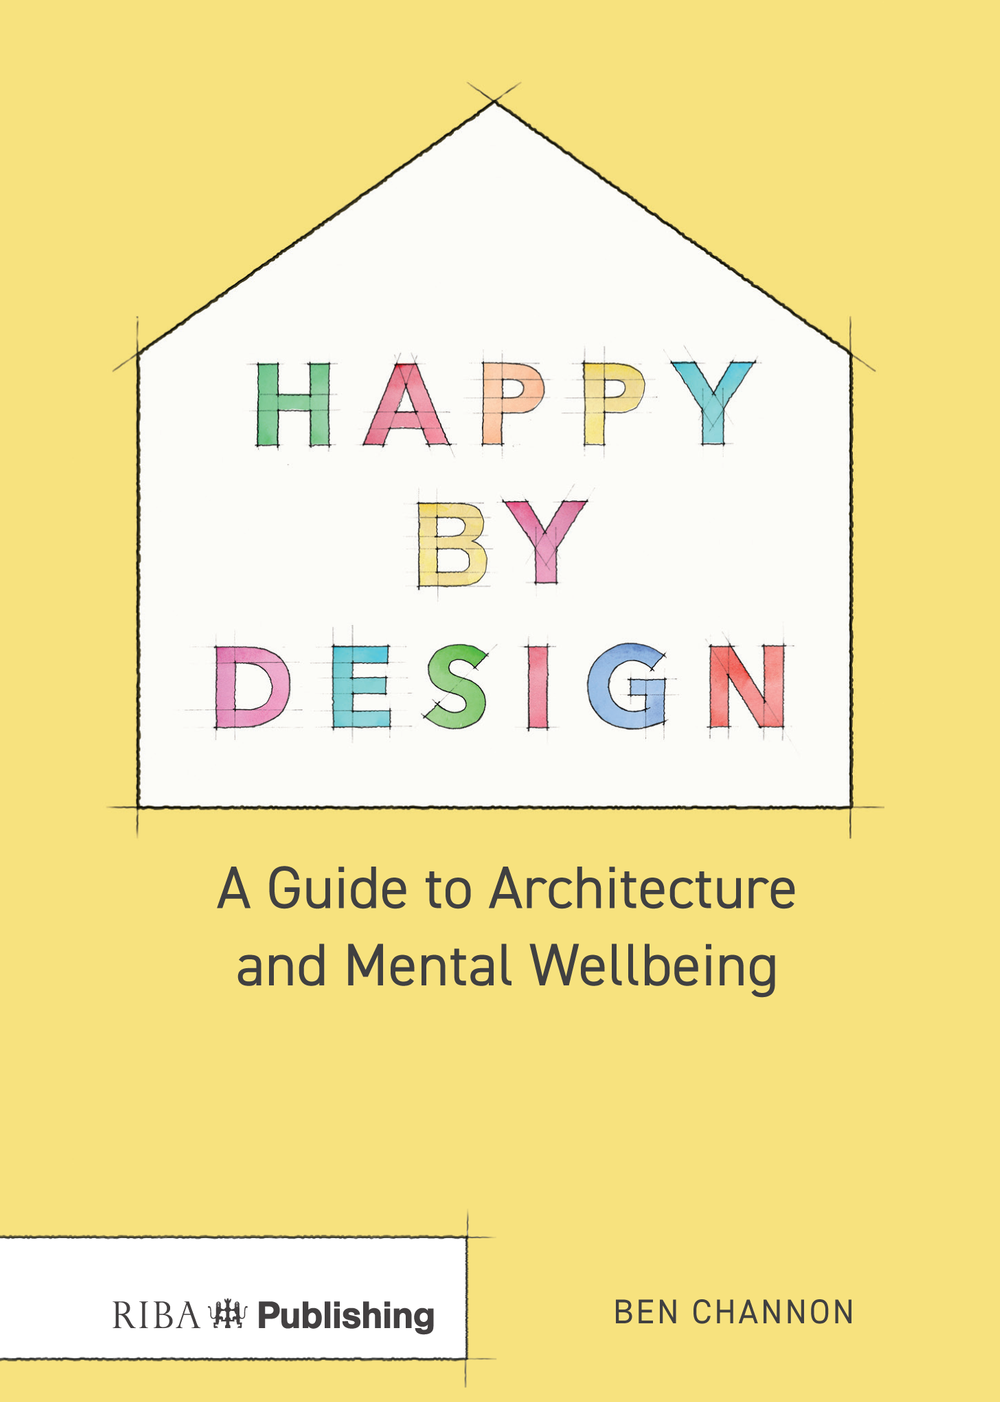 Happy by Design has just been published by Ben Channon via the Royal Institute of British Architects (RIBA)